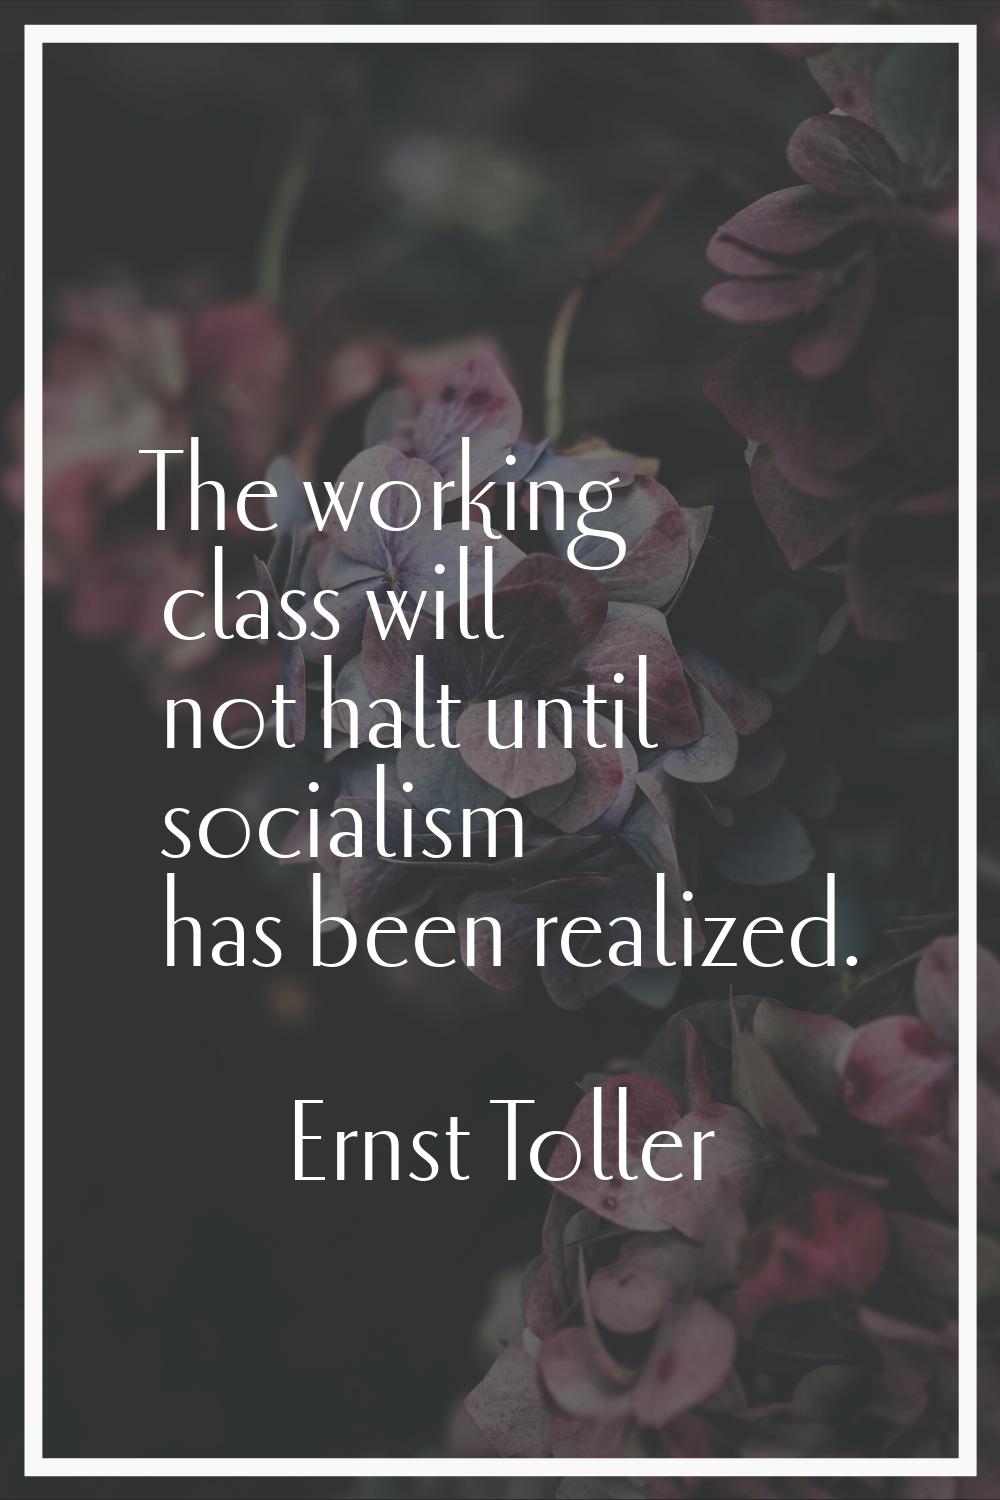 The working class will not halt until socialism has been realized.